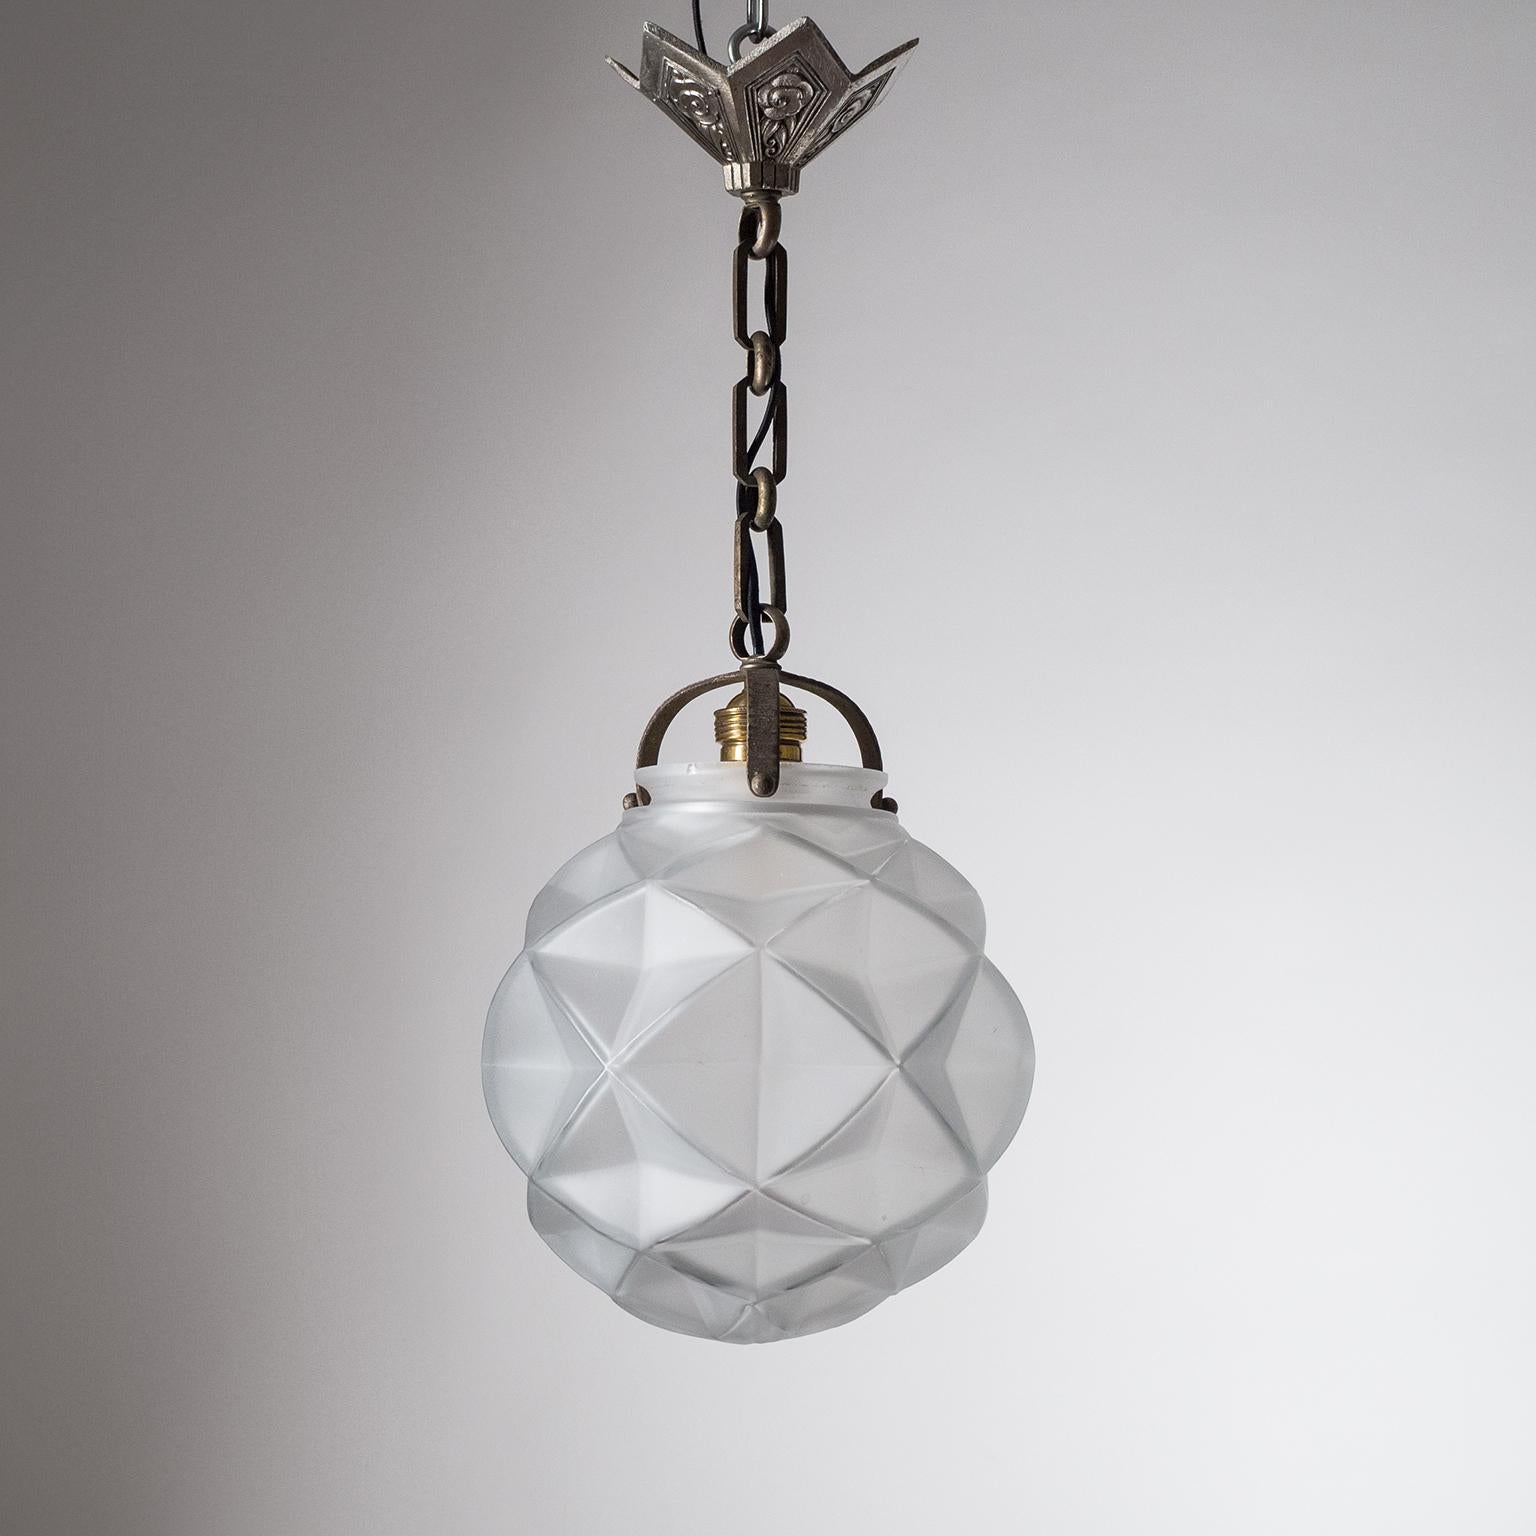 French Art Deco Pendant, 1930s, Satin Glass and Nickel 2